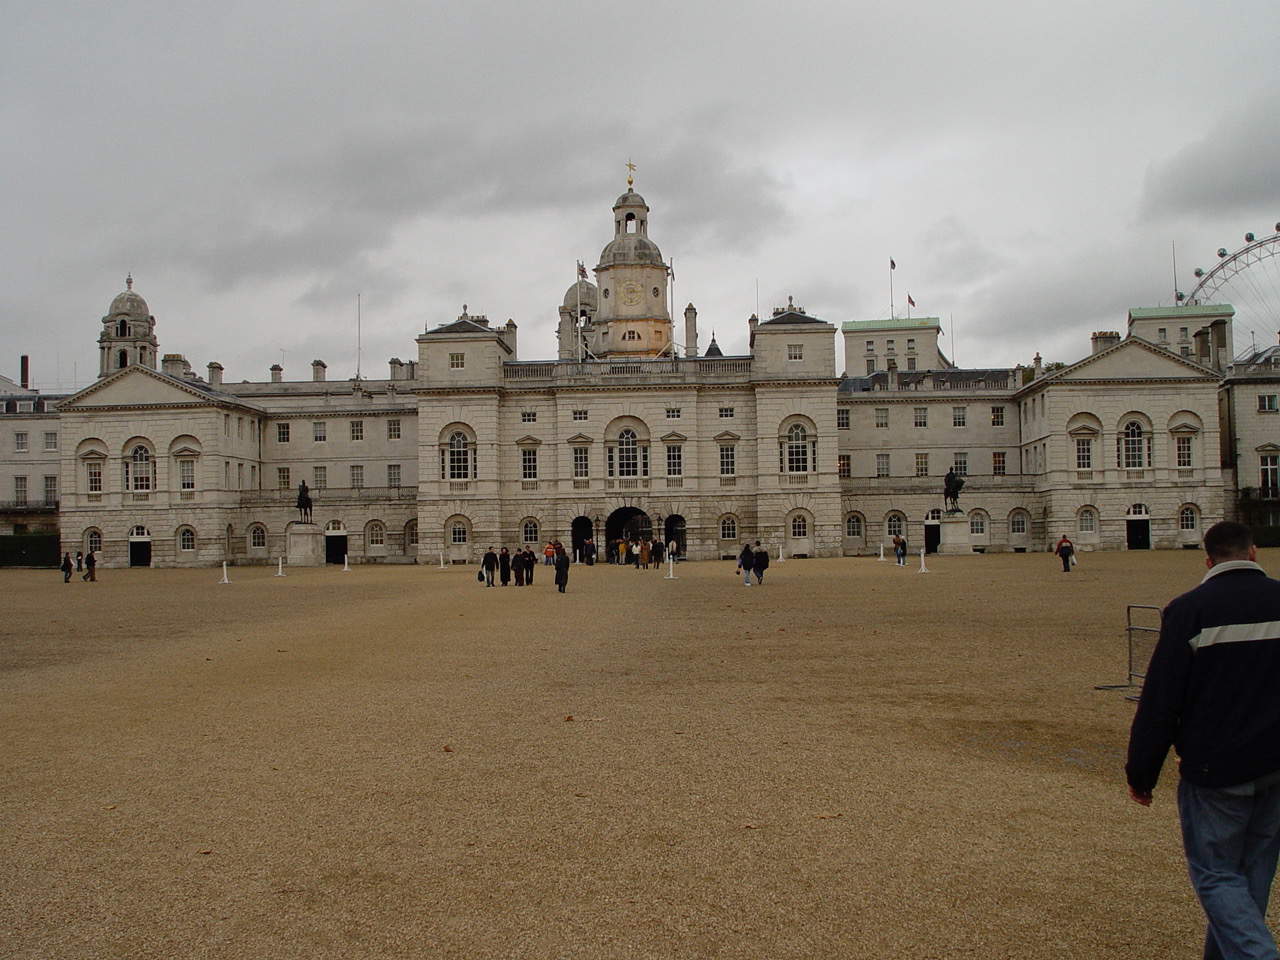 Horse Guards Parade (foreground) and Horse Guards building (rear)